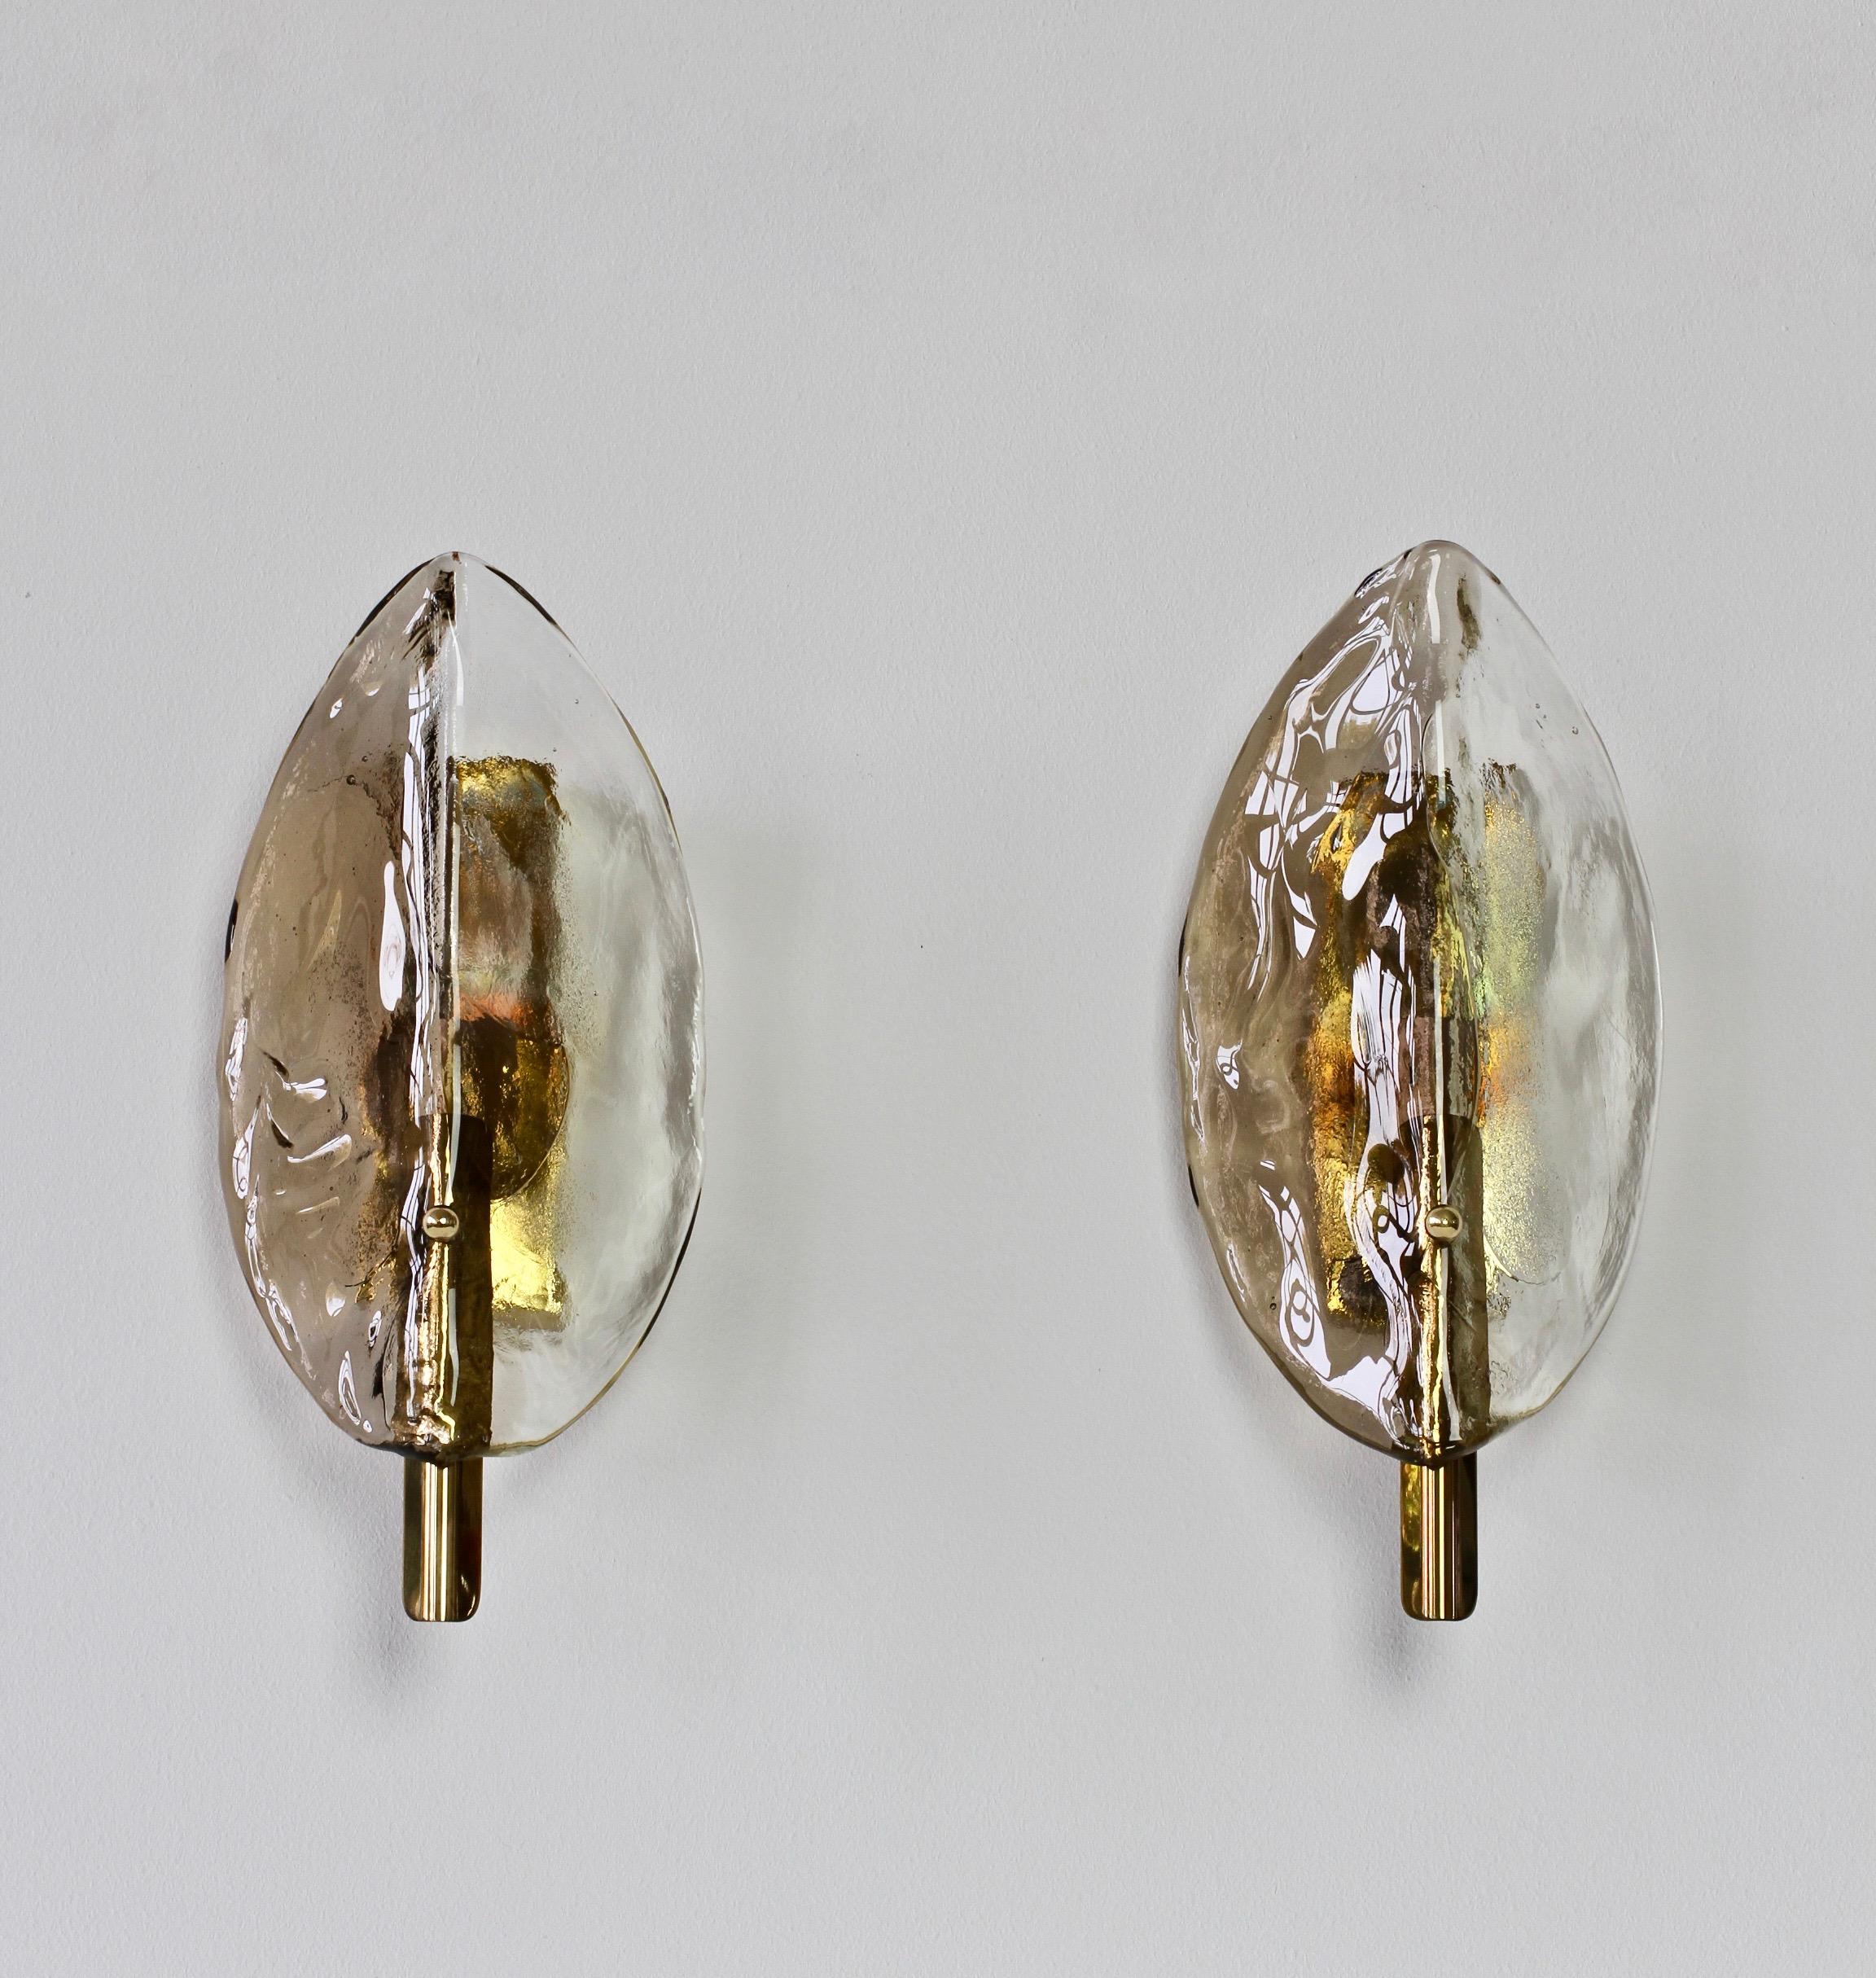 Vintage midcentury pair of brass, smoked and clear Murano glass wall lamps, lights or sconces by Austrian lighting manufacturer Kalmar, circa late 1970s. Featuring two folded, curved 'flower petal' shaped glass elements / shades, made by Italian